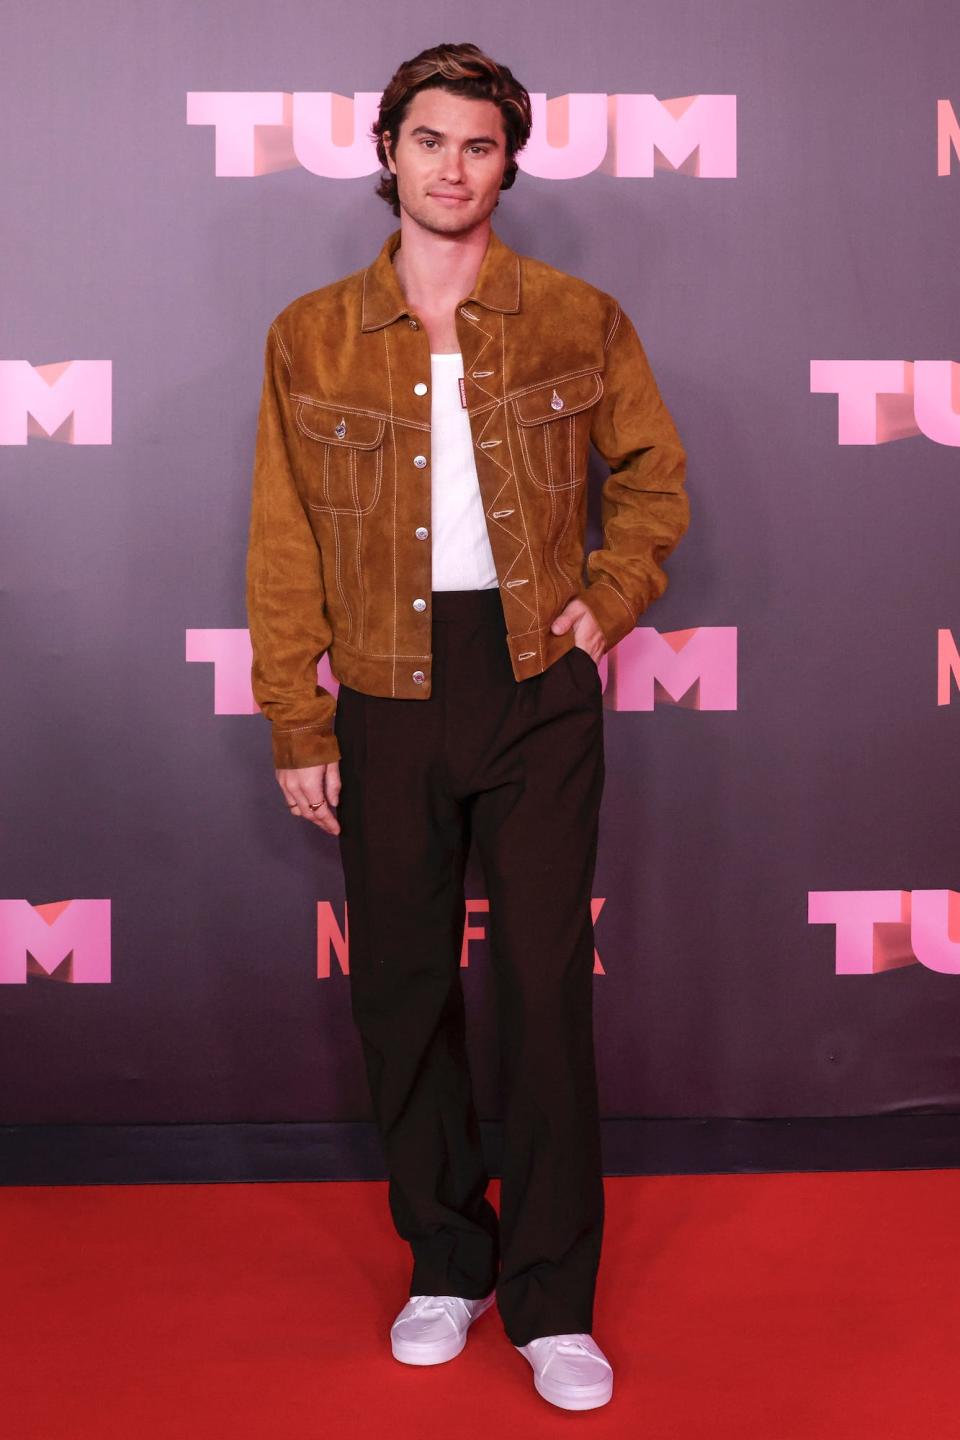 Chase Stokes attends Netflix's Tudum event in Sao Paulo, Brazil.